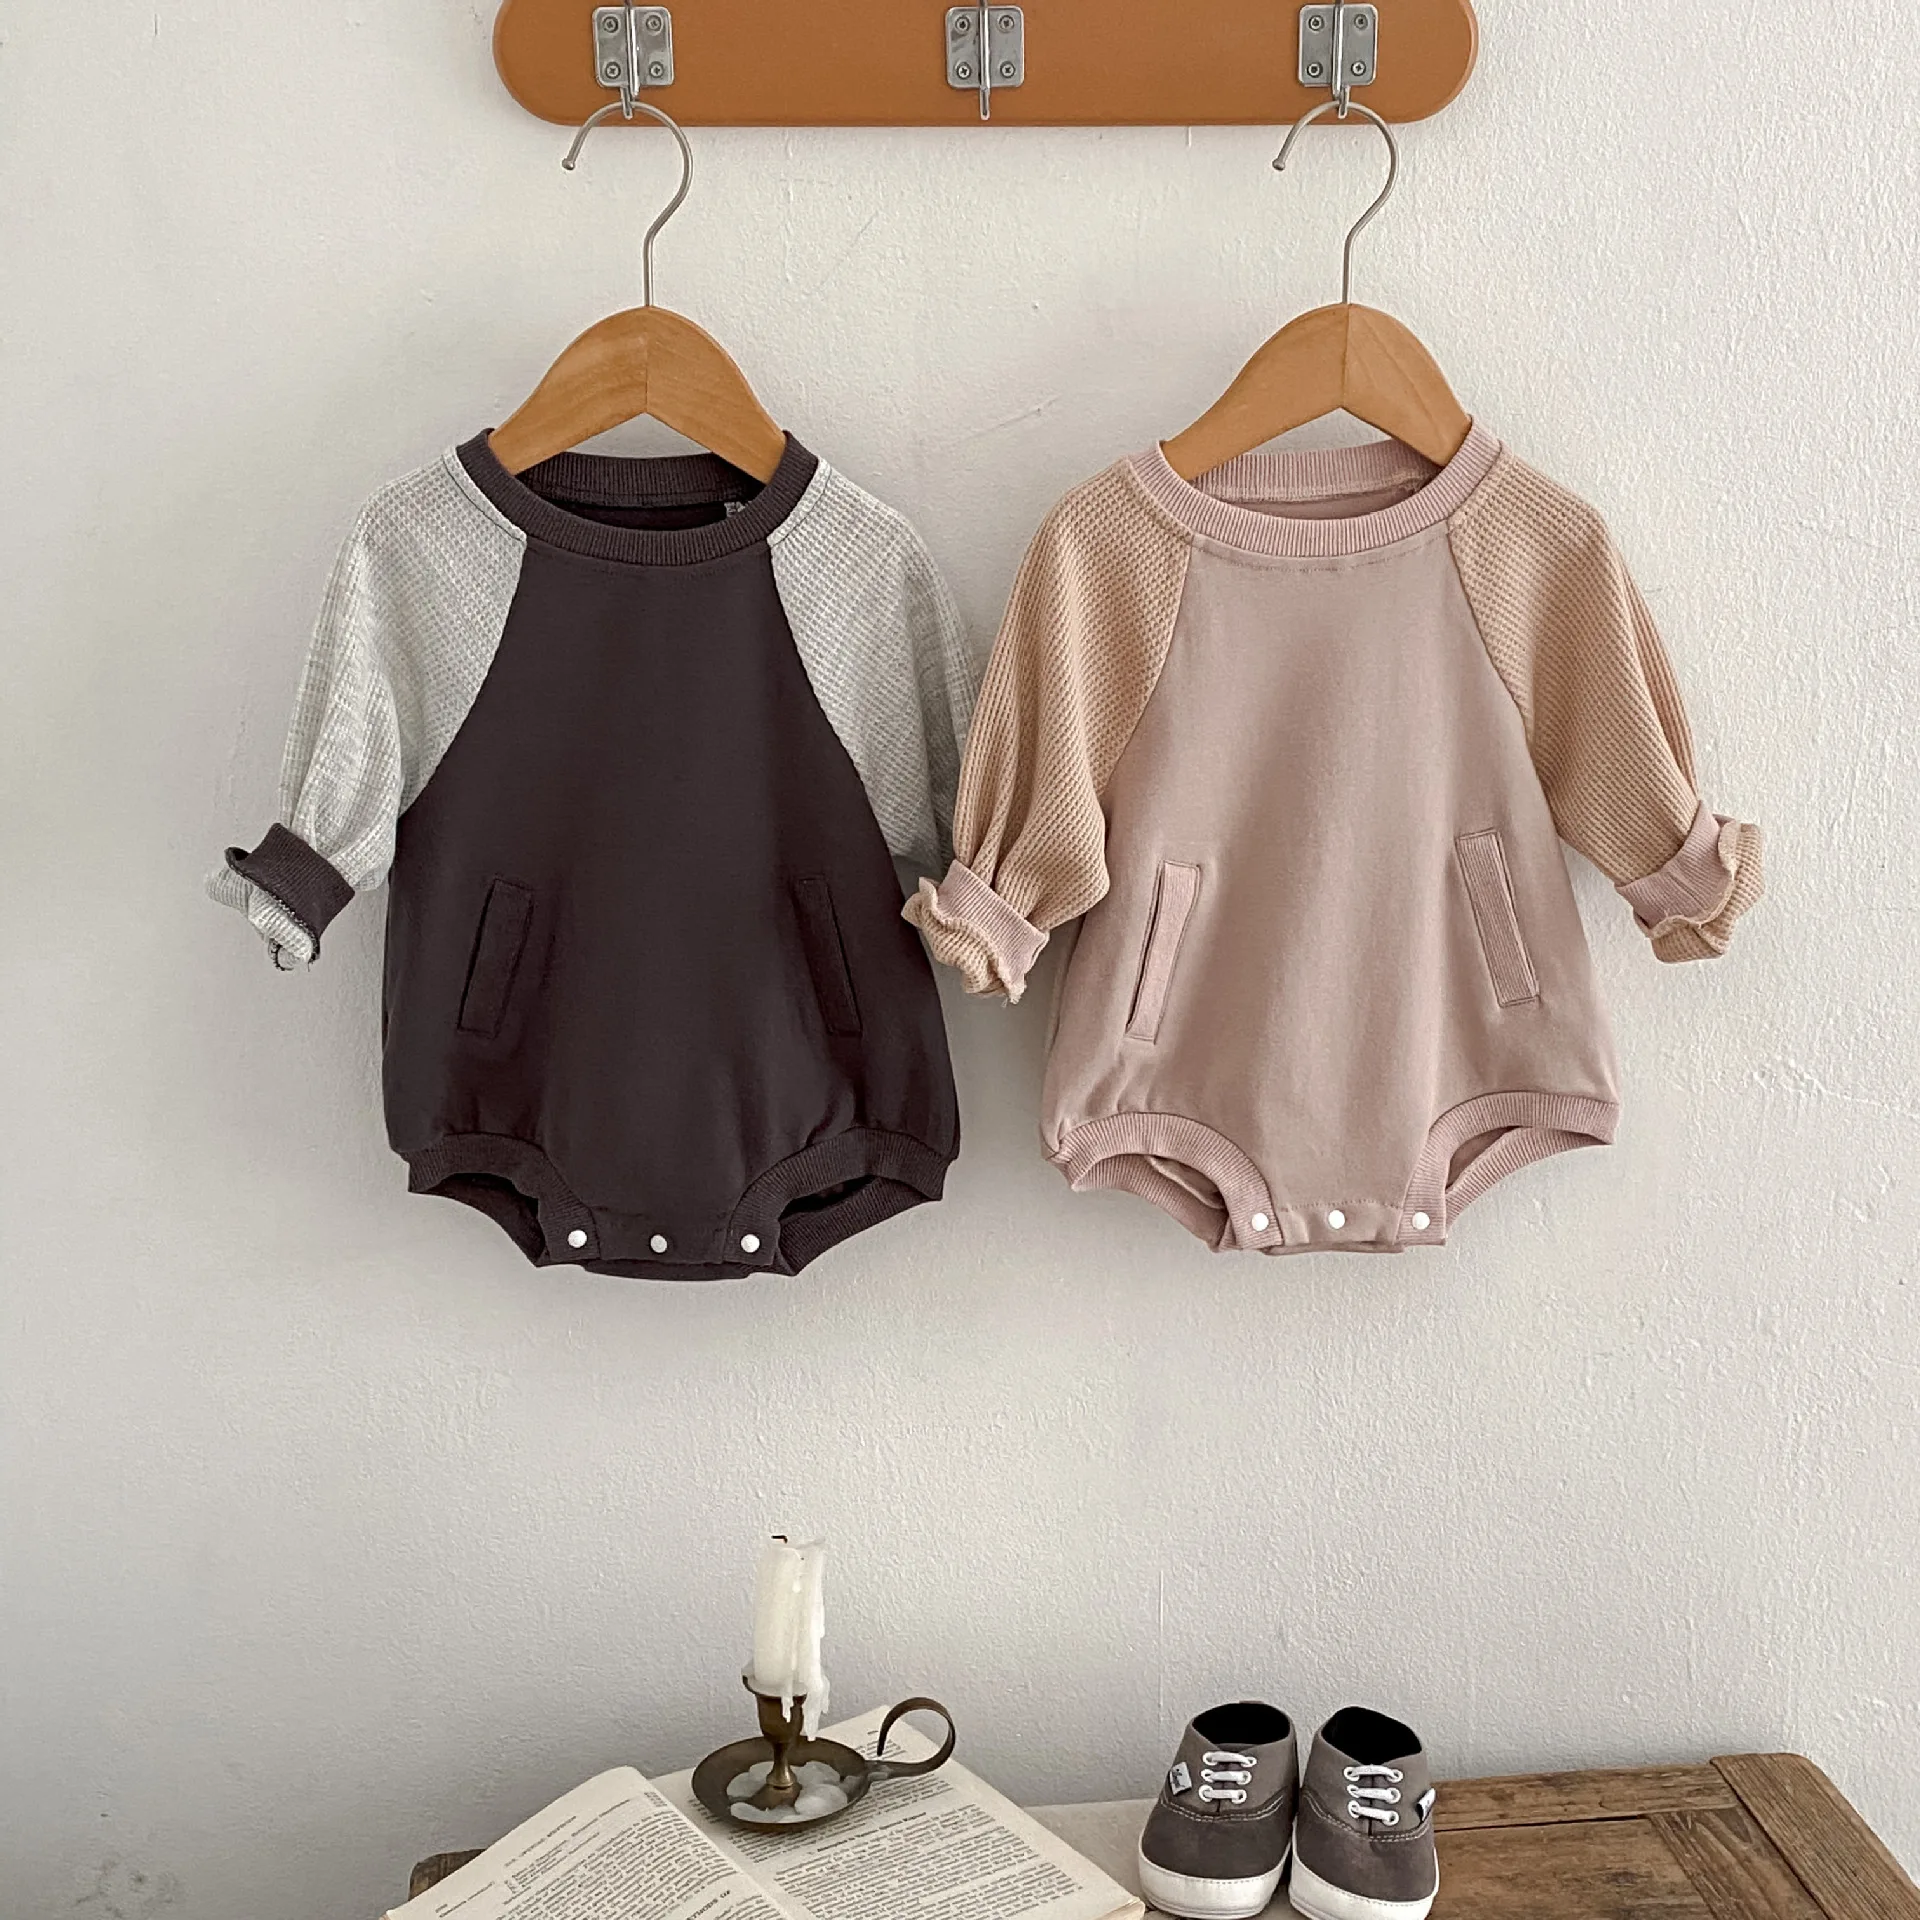 

Autumn Clothes Boy Baby Waffle Pockets Retro Splicing Long Sleeves Bodysuit Girl Infant Simple Comfortable Casual Cotton Onesie